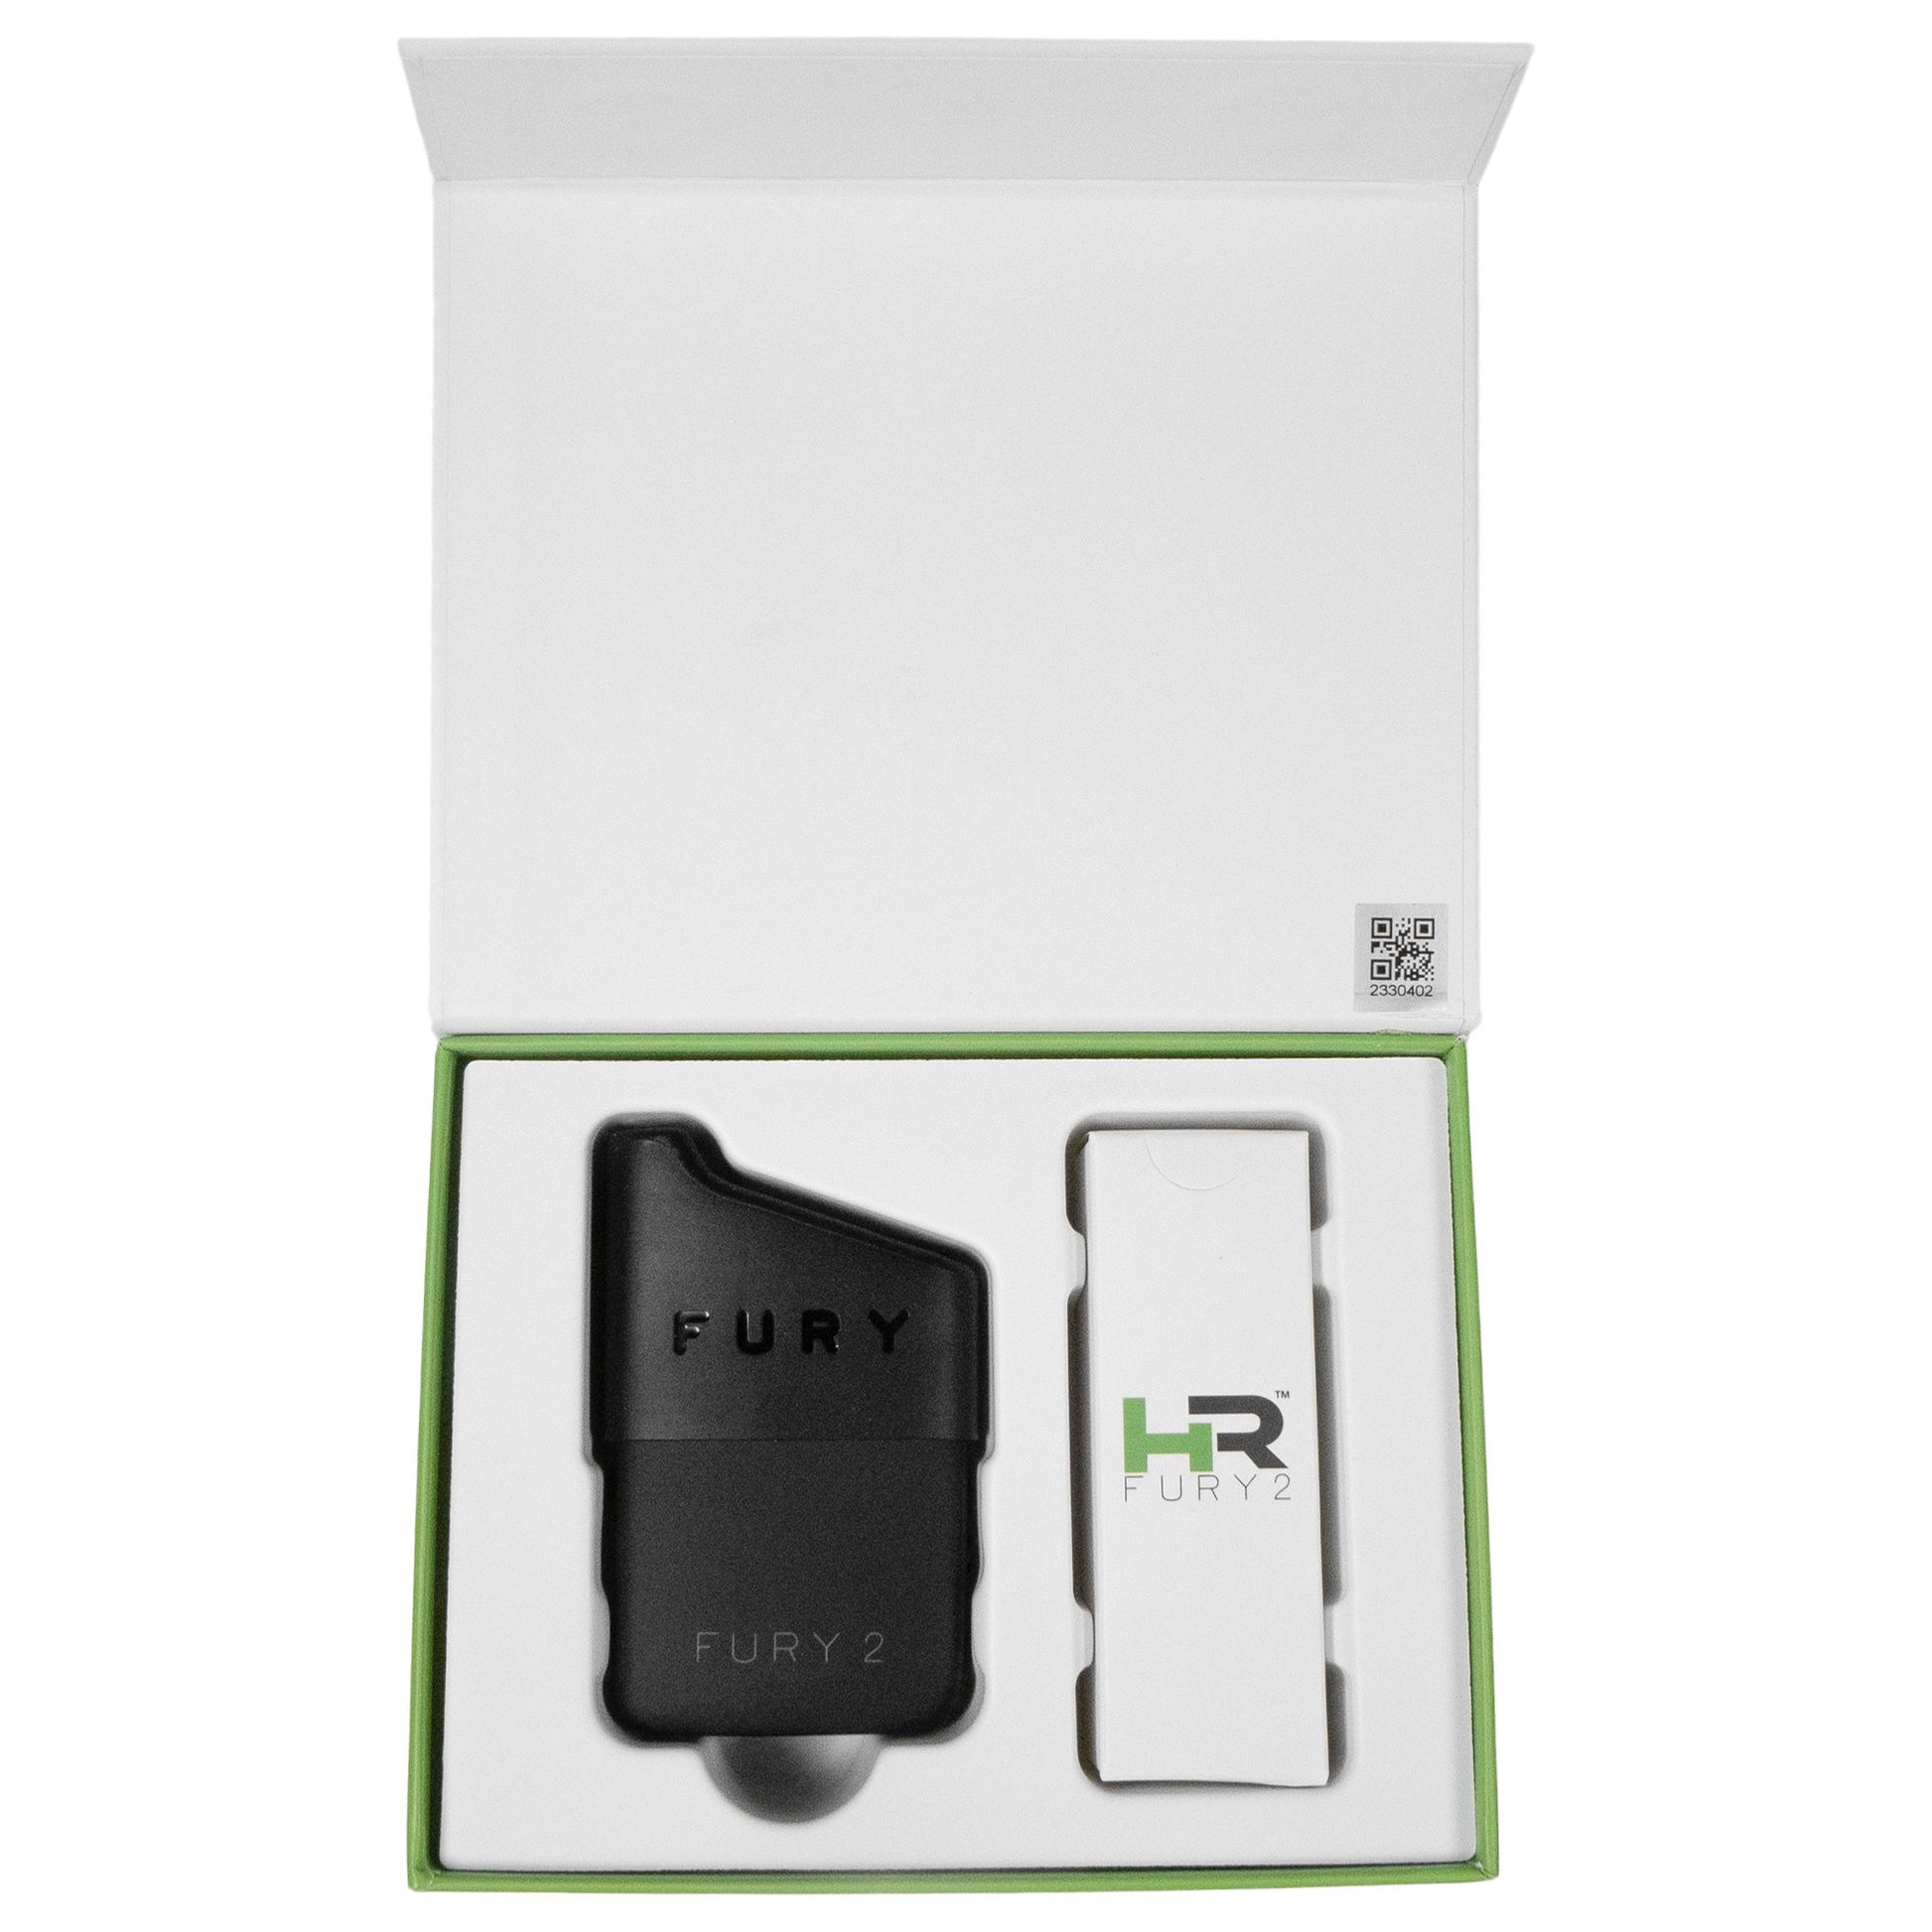 Healthy Rips Fury 2 Vaporizers Healthy Rips 